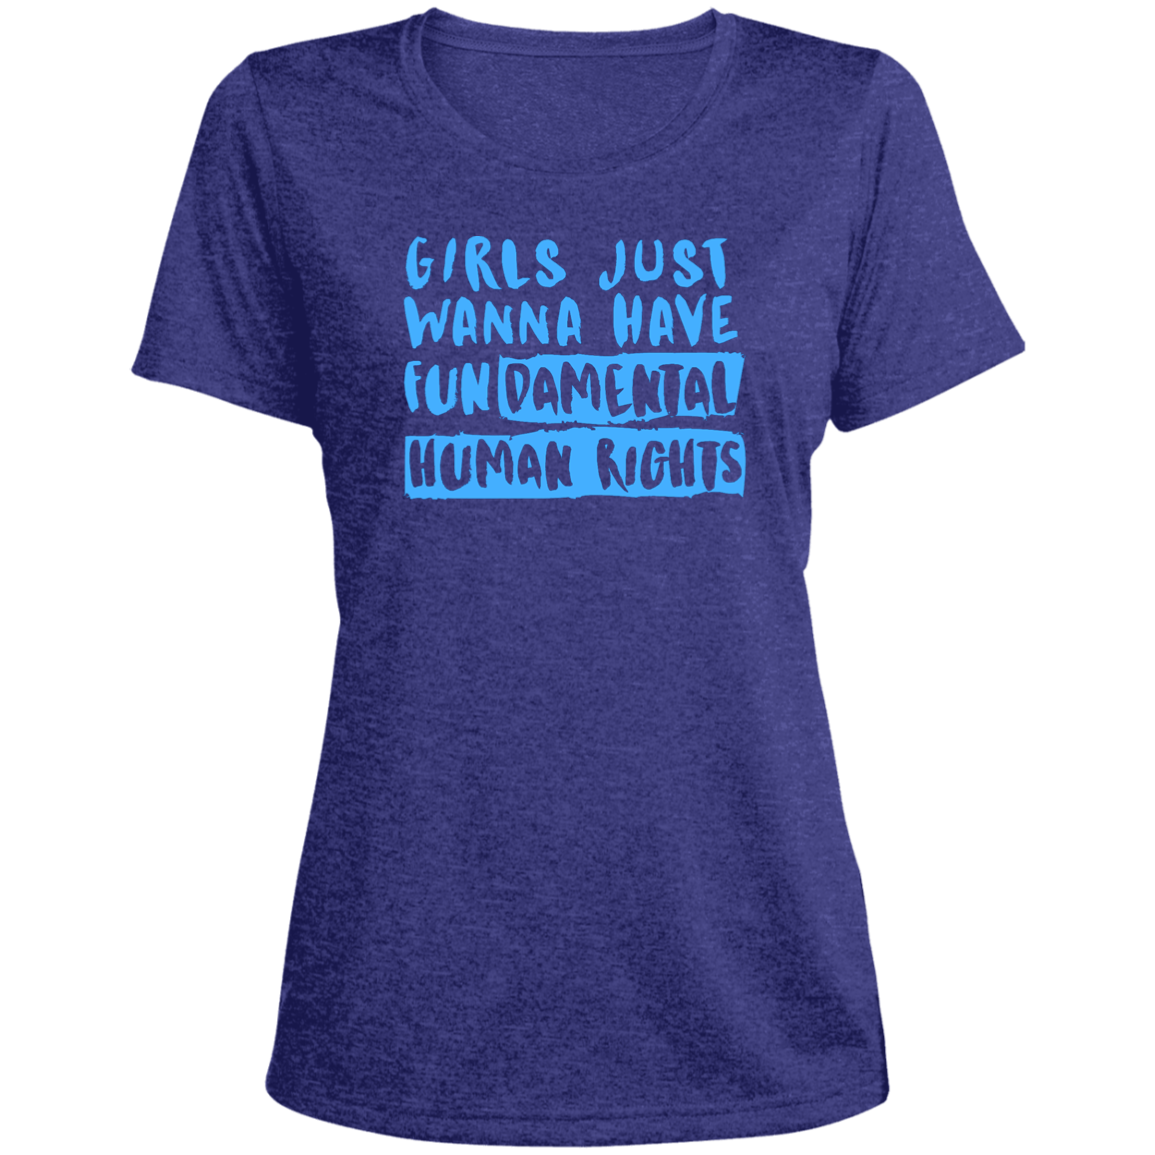 Girls Just Want To Have Fun... Ladies' Heather Scoop Neck Performance Tee